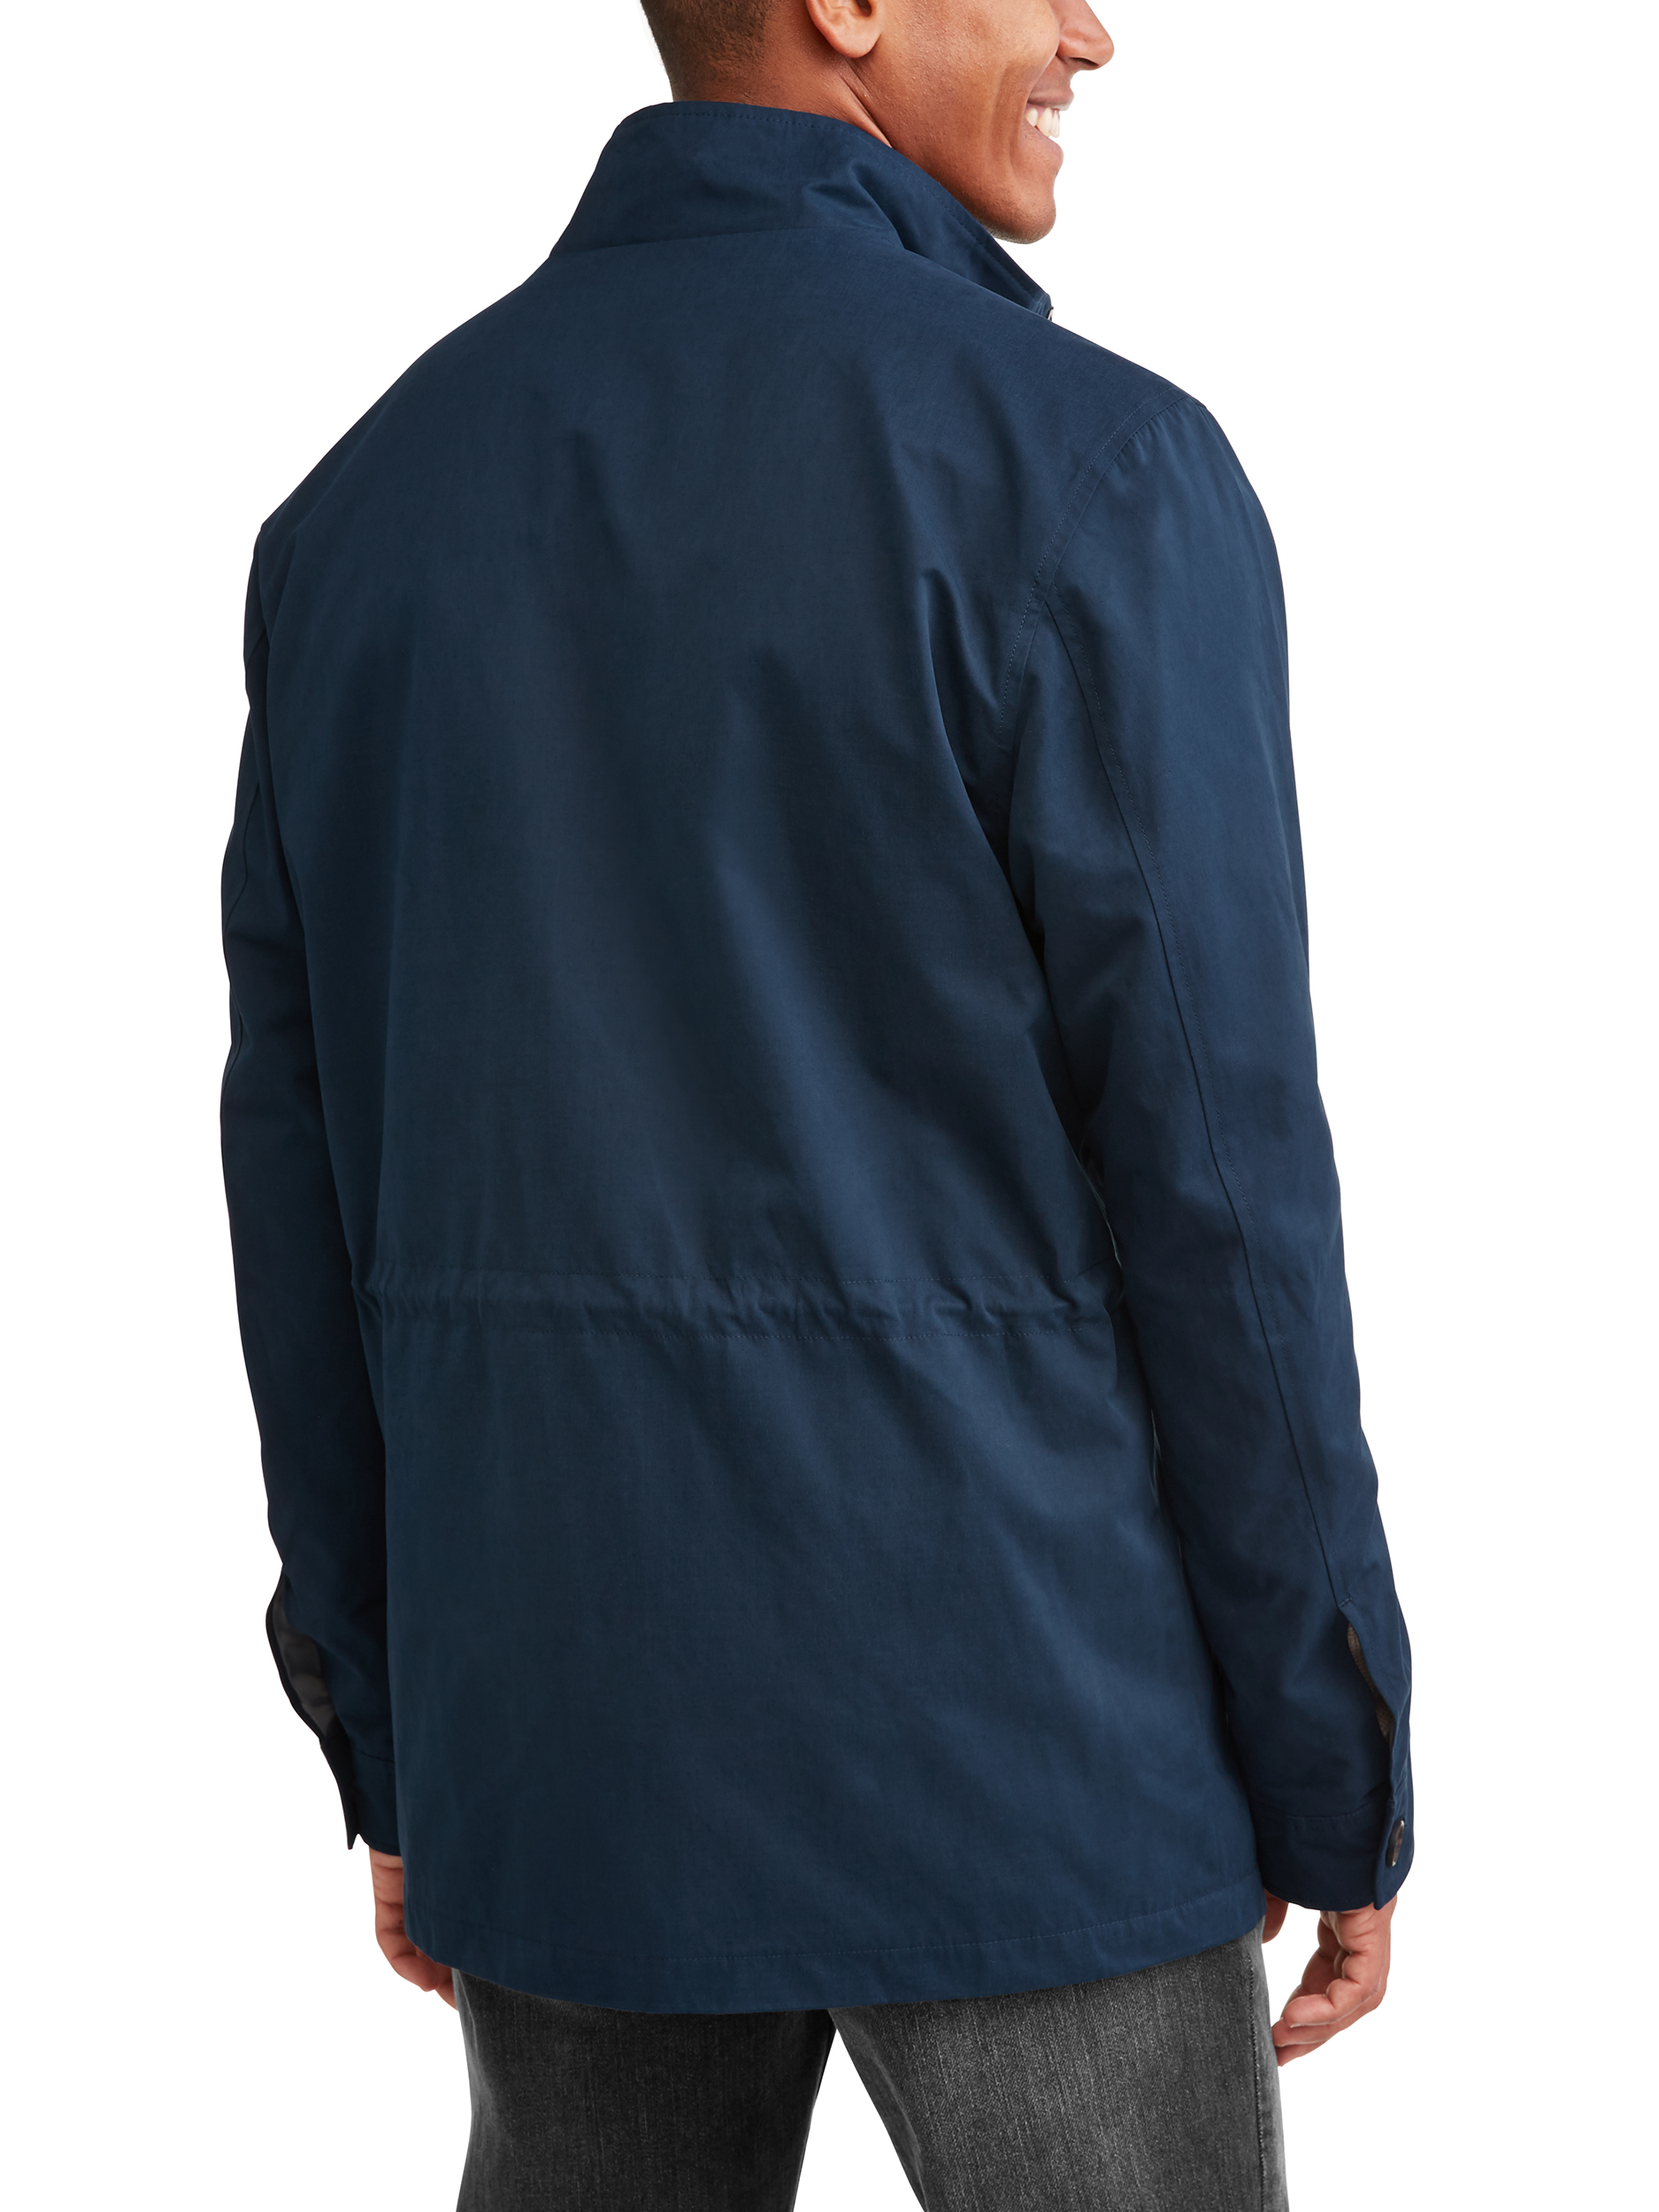 George Men's field jacket up to size 5xl - image 4 of 5